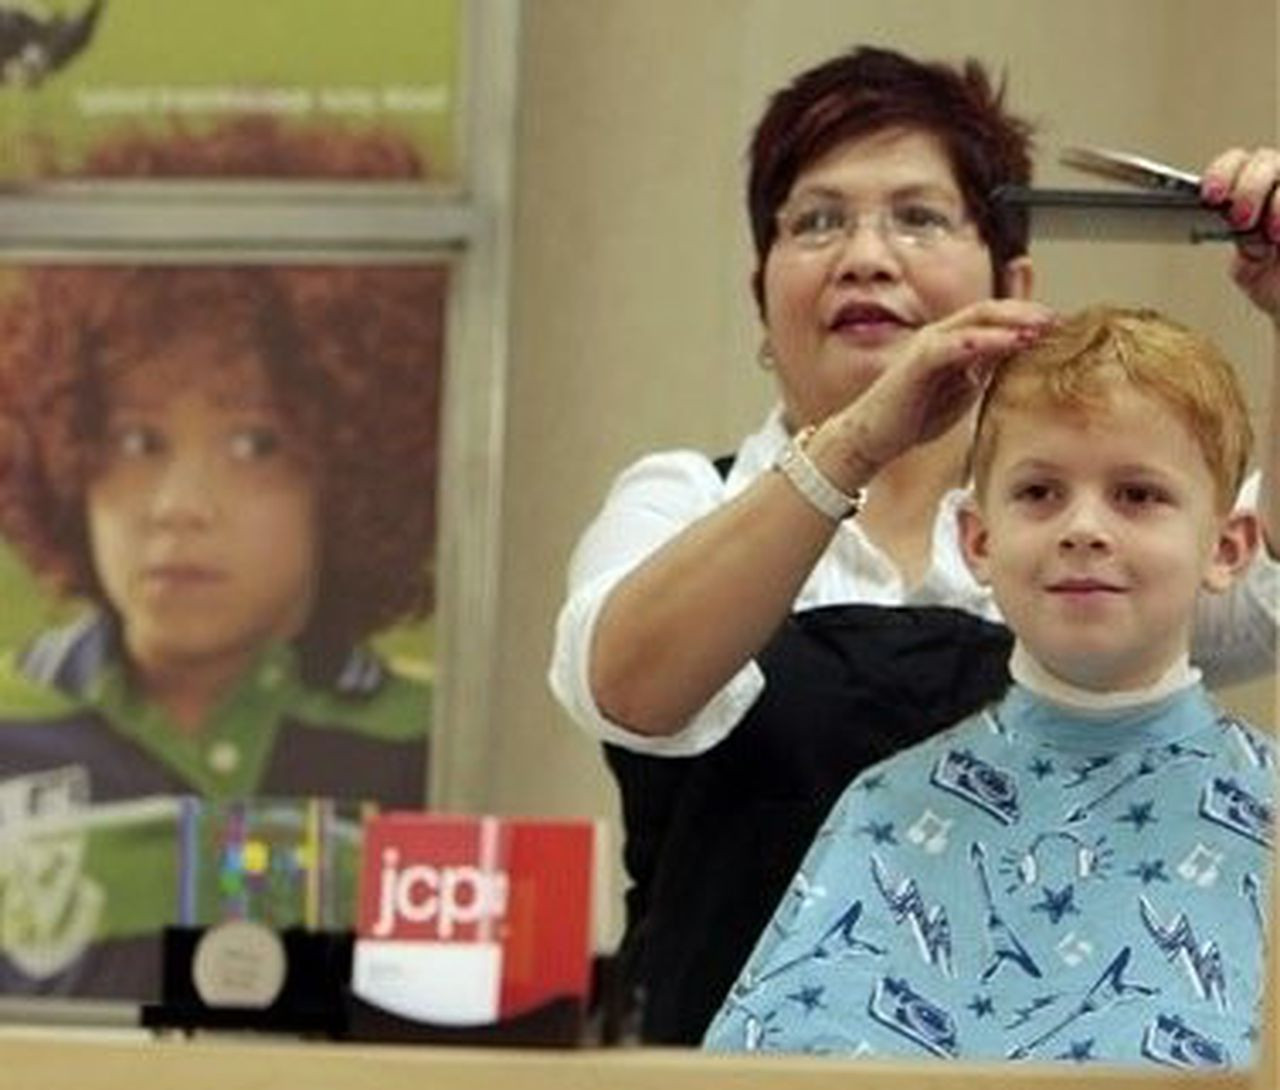 Kids Haircuts Portland
 Salvation Army gives free haircuts to kids Tuesday Dec